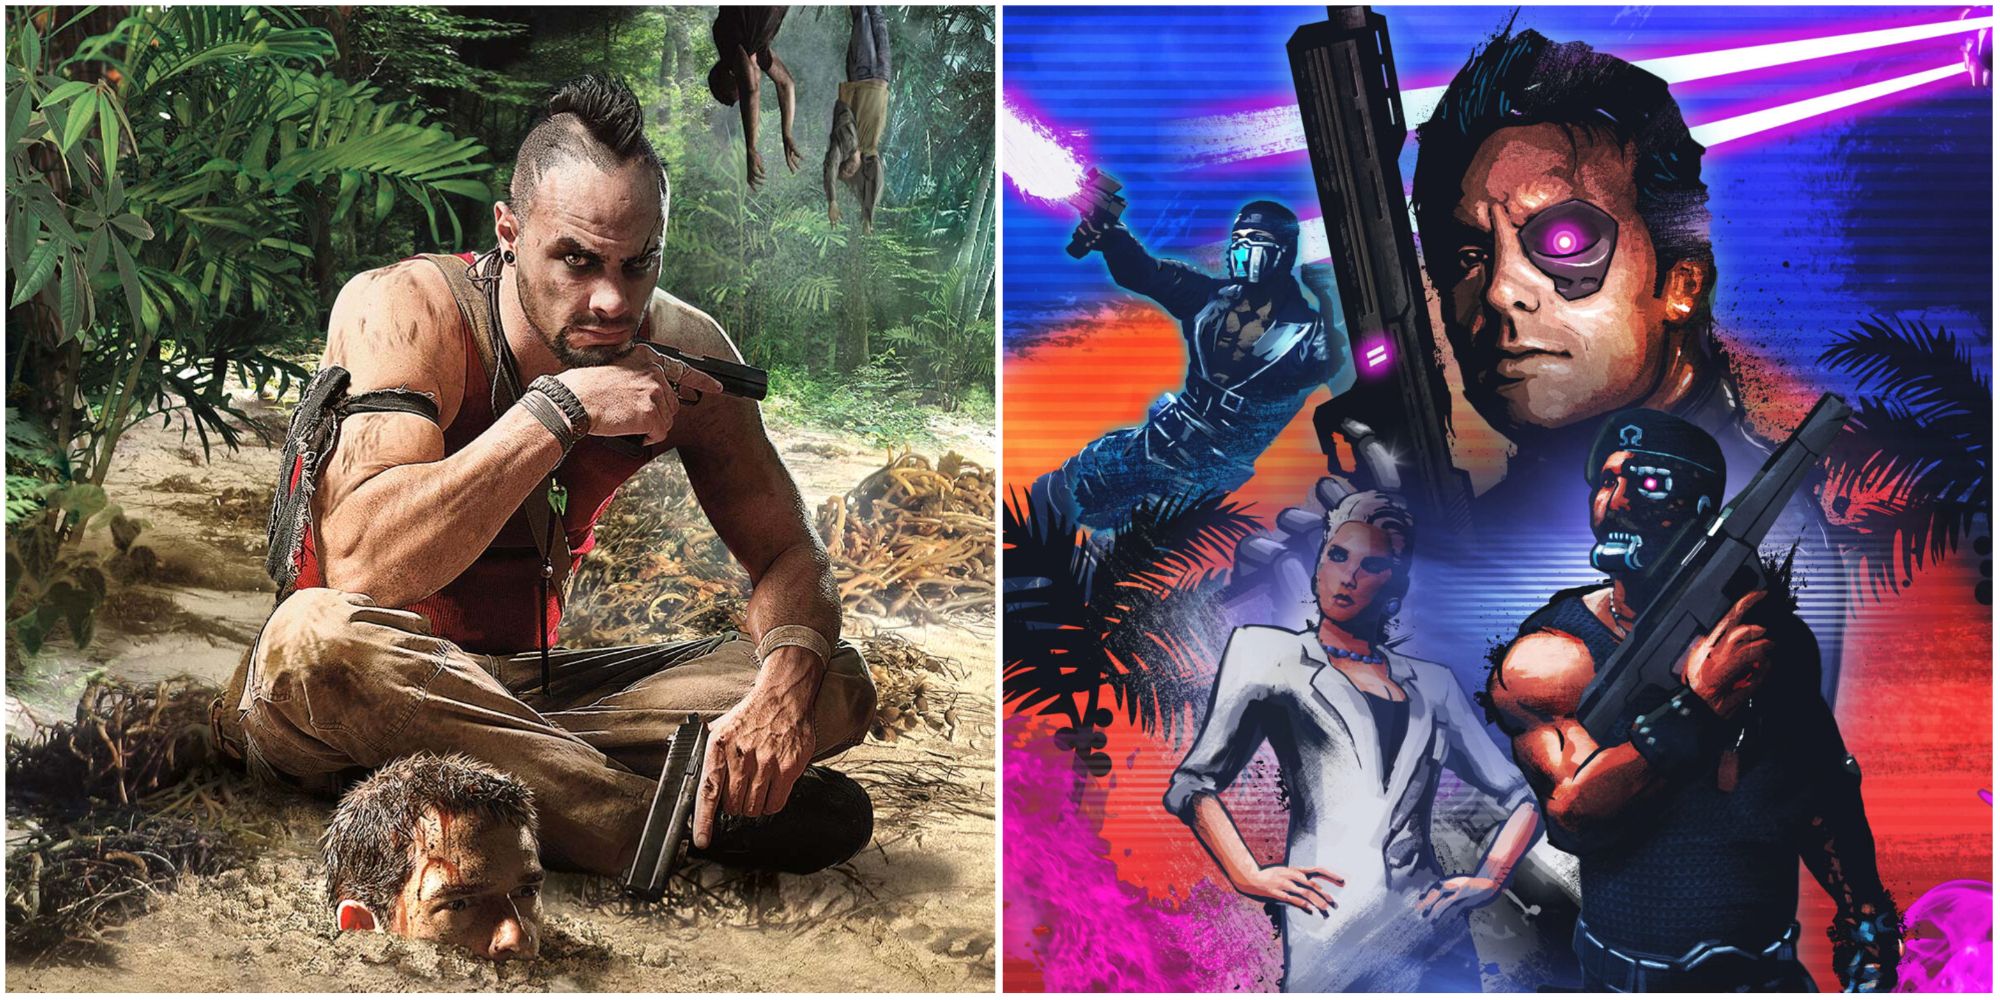 Vaas in Far Cry 3 and Rex Colt in Blood Dragon